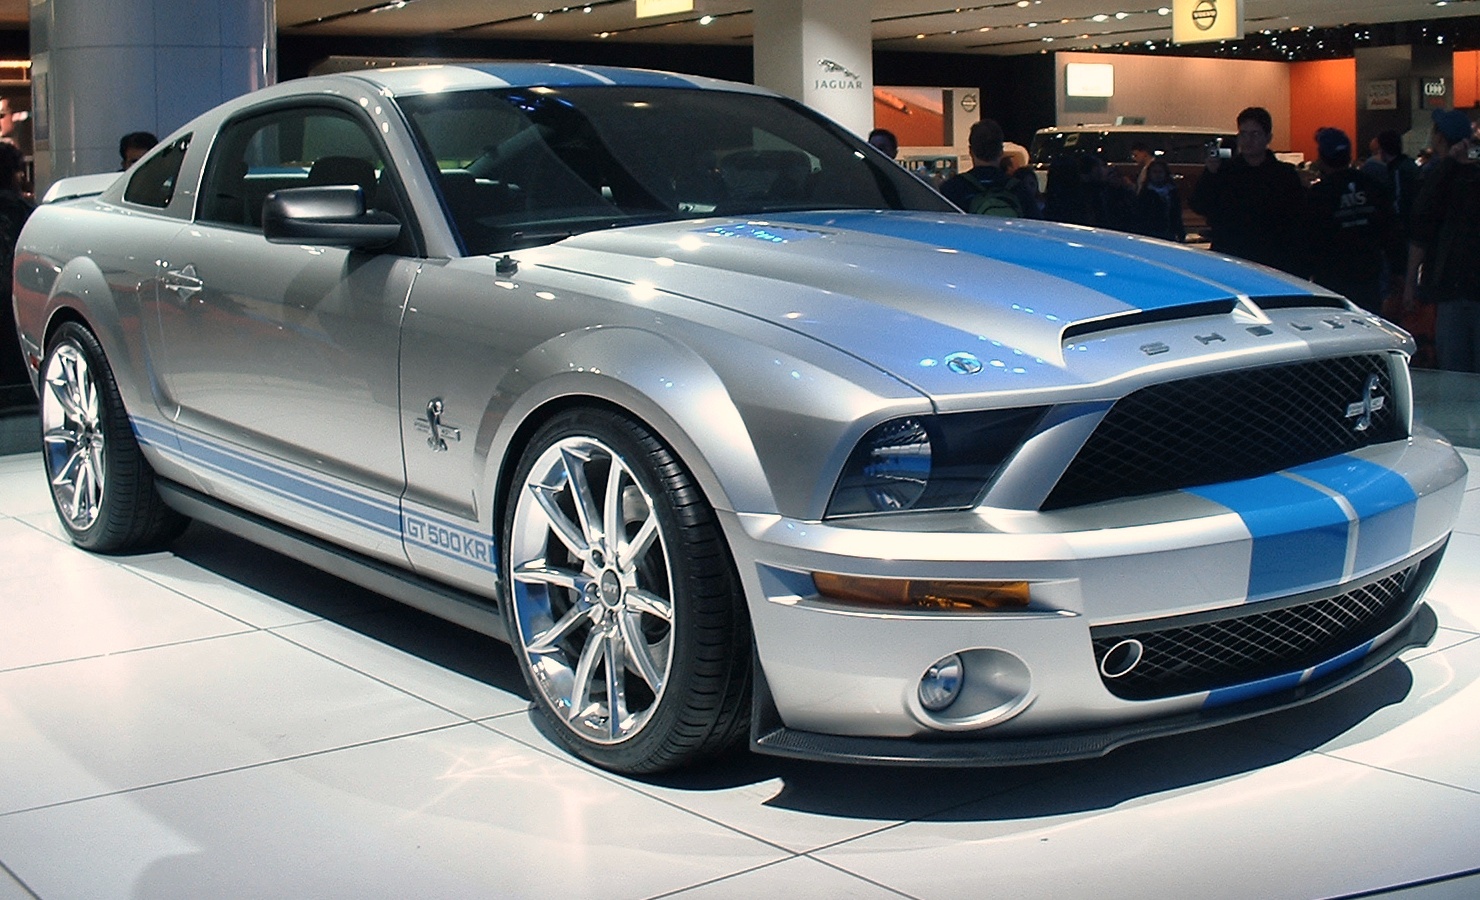 2007 Ford Shelby GT500 Coupé - Photos - 2007 Ford Shelby GT500...